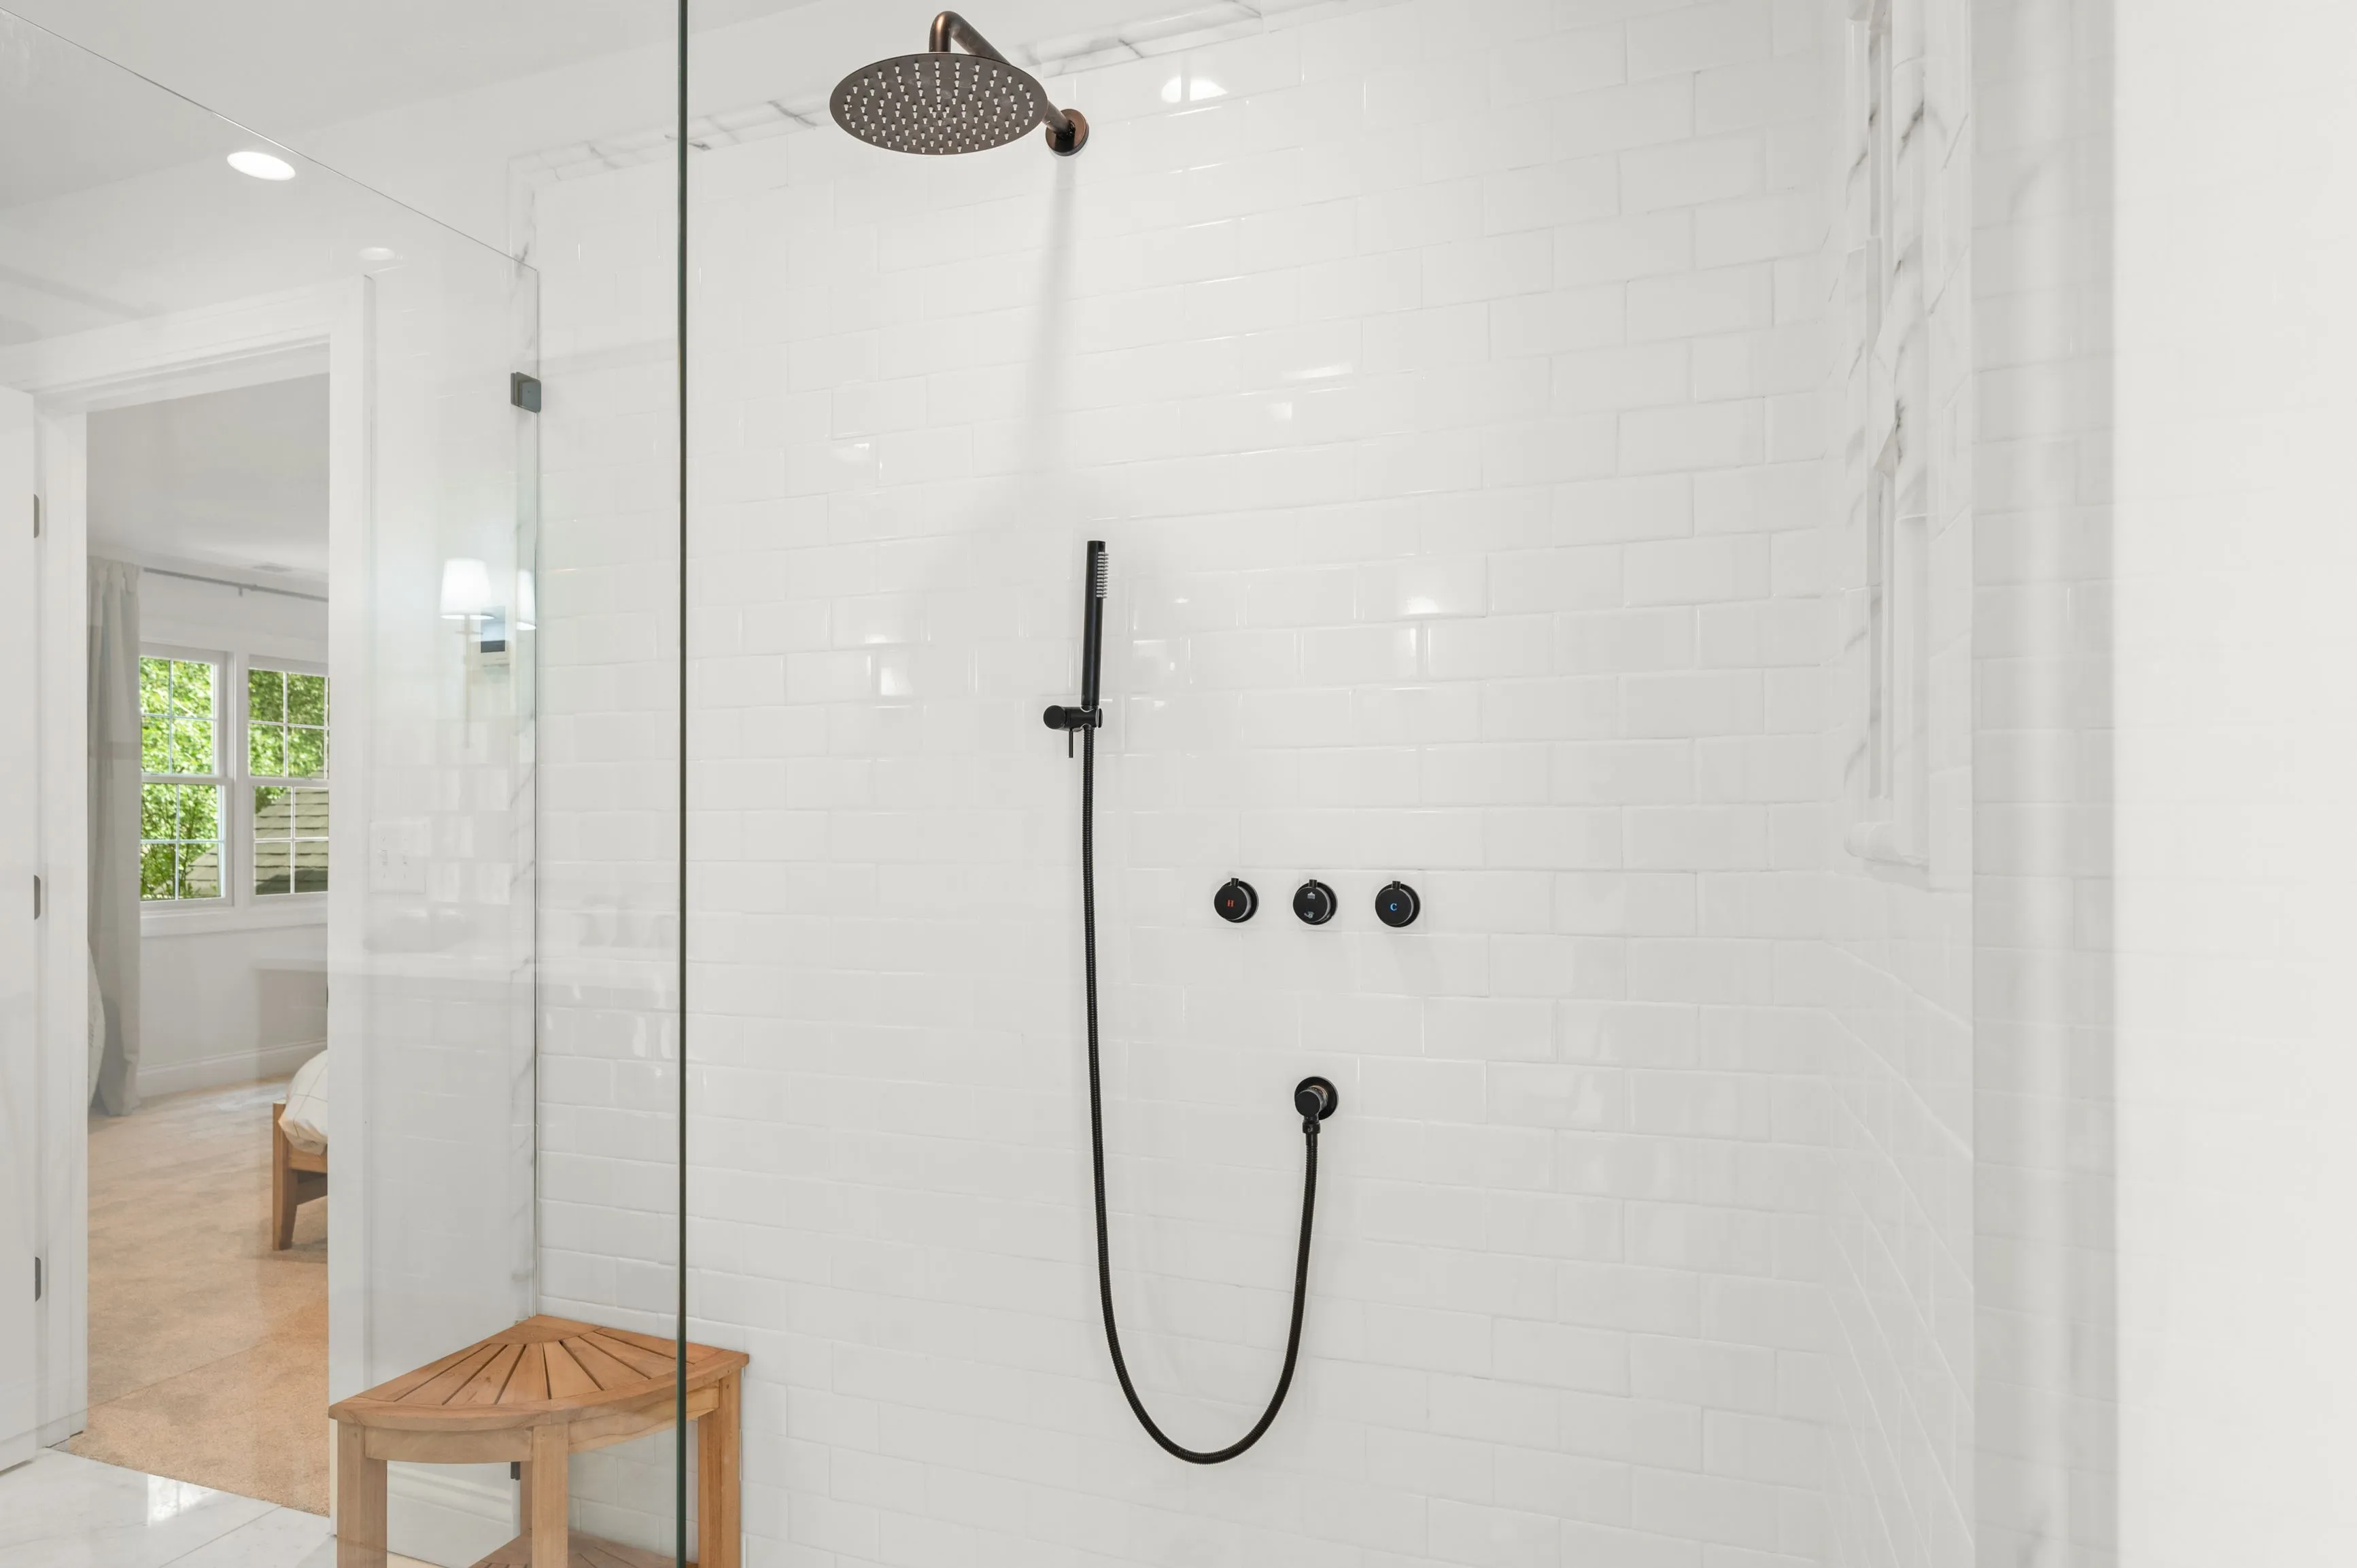 Modern shower with white subway tiles, glass door, bronze shower head and fixtures, and a wooden stool.